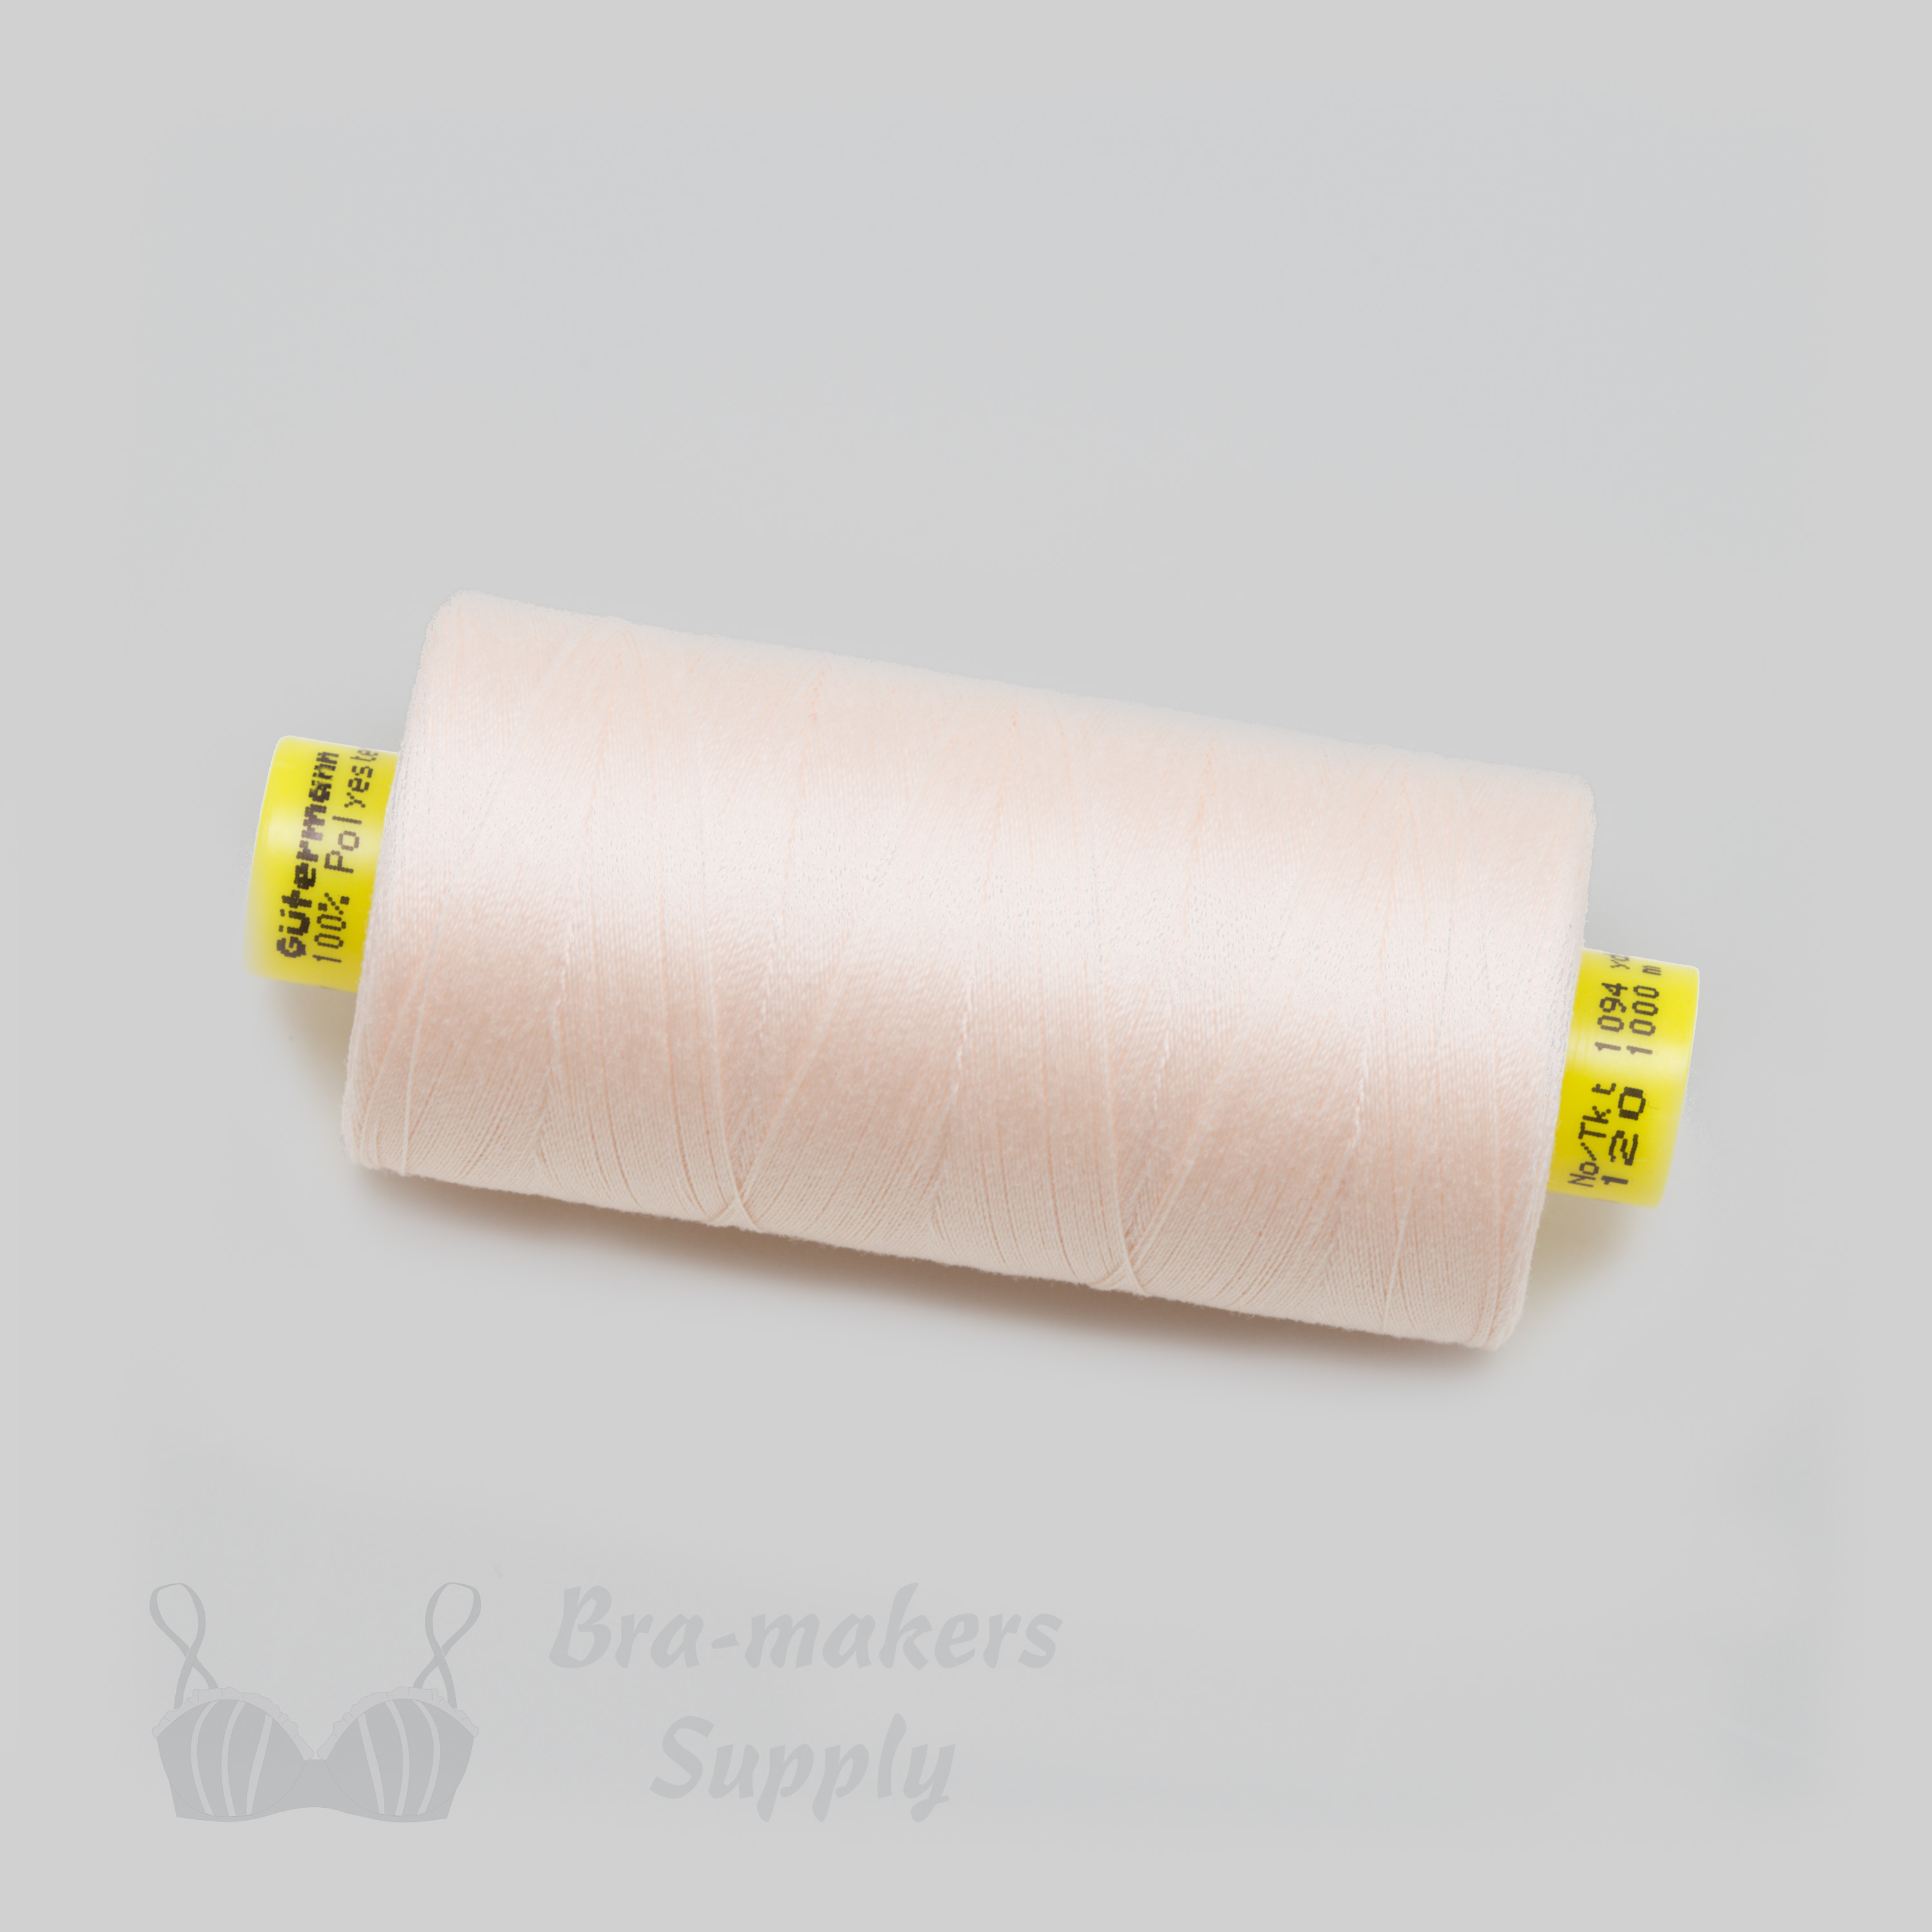 gutermann mara 120 industry quality polyester thread TG-10 peach or Pantone 12-1008 linen from Bra-Makers Supply 1 spool shown